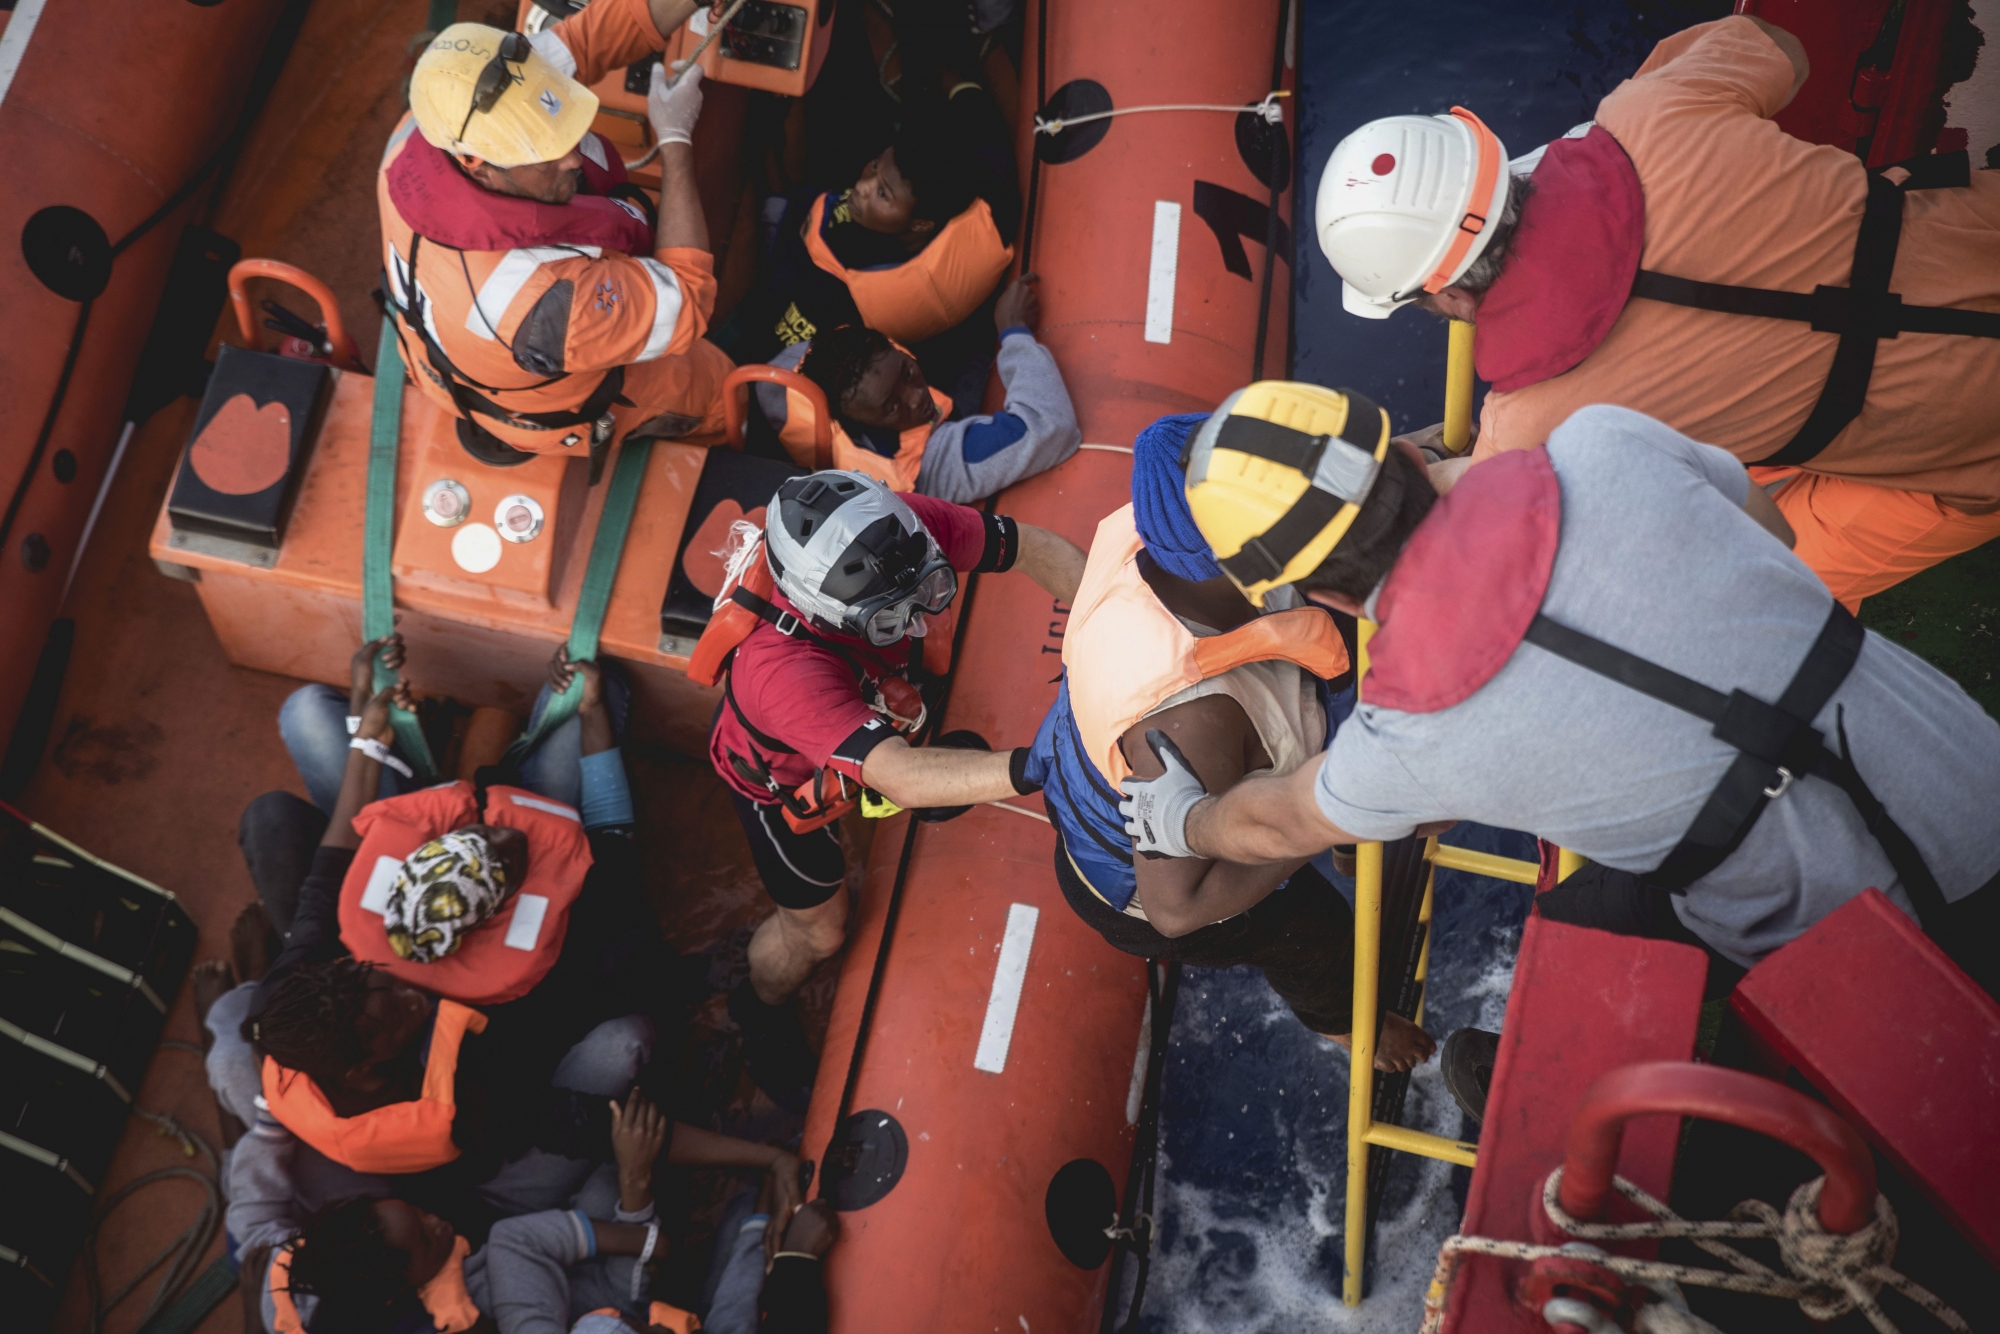 In this image made available Thursday Oct. 27, 2016, by Save The Children, workers with the international charitable organisation Save the Children assist migrants to board the Vos Hestia boat from a rib rescue craft, rescued from a migrant boat in the Mediterranean Sea, during a rescue operation off the coast of North Africa, in the Mediterranean Sea, Wednesday Oct. 26, 2016.  According to Save the Children, more than 290 people were brought aboard the Vos Hestia on Wednesday, along with 20 lifeless bodies. (Save The Children via AP) EUROPE MEDITERRANEAN MIGRANTS